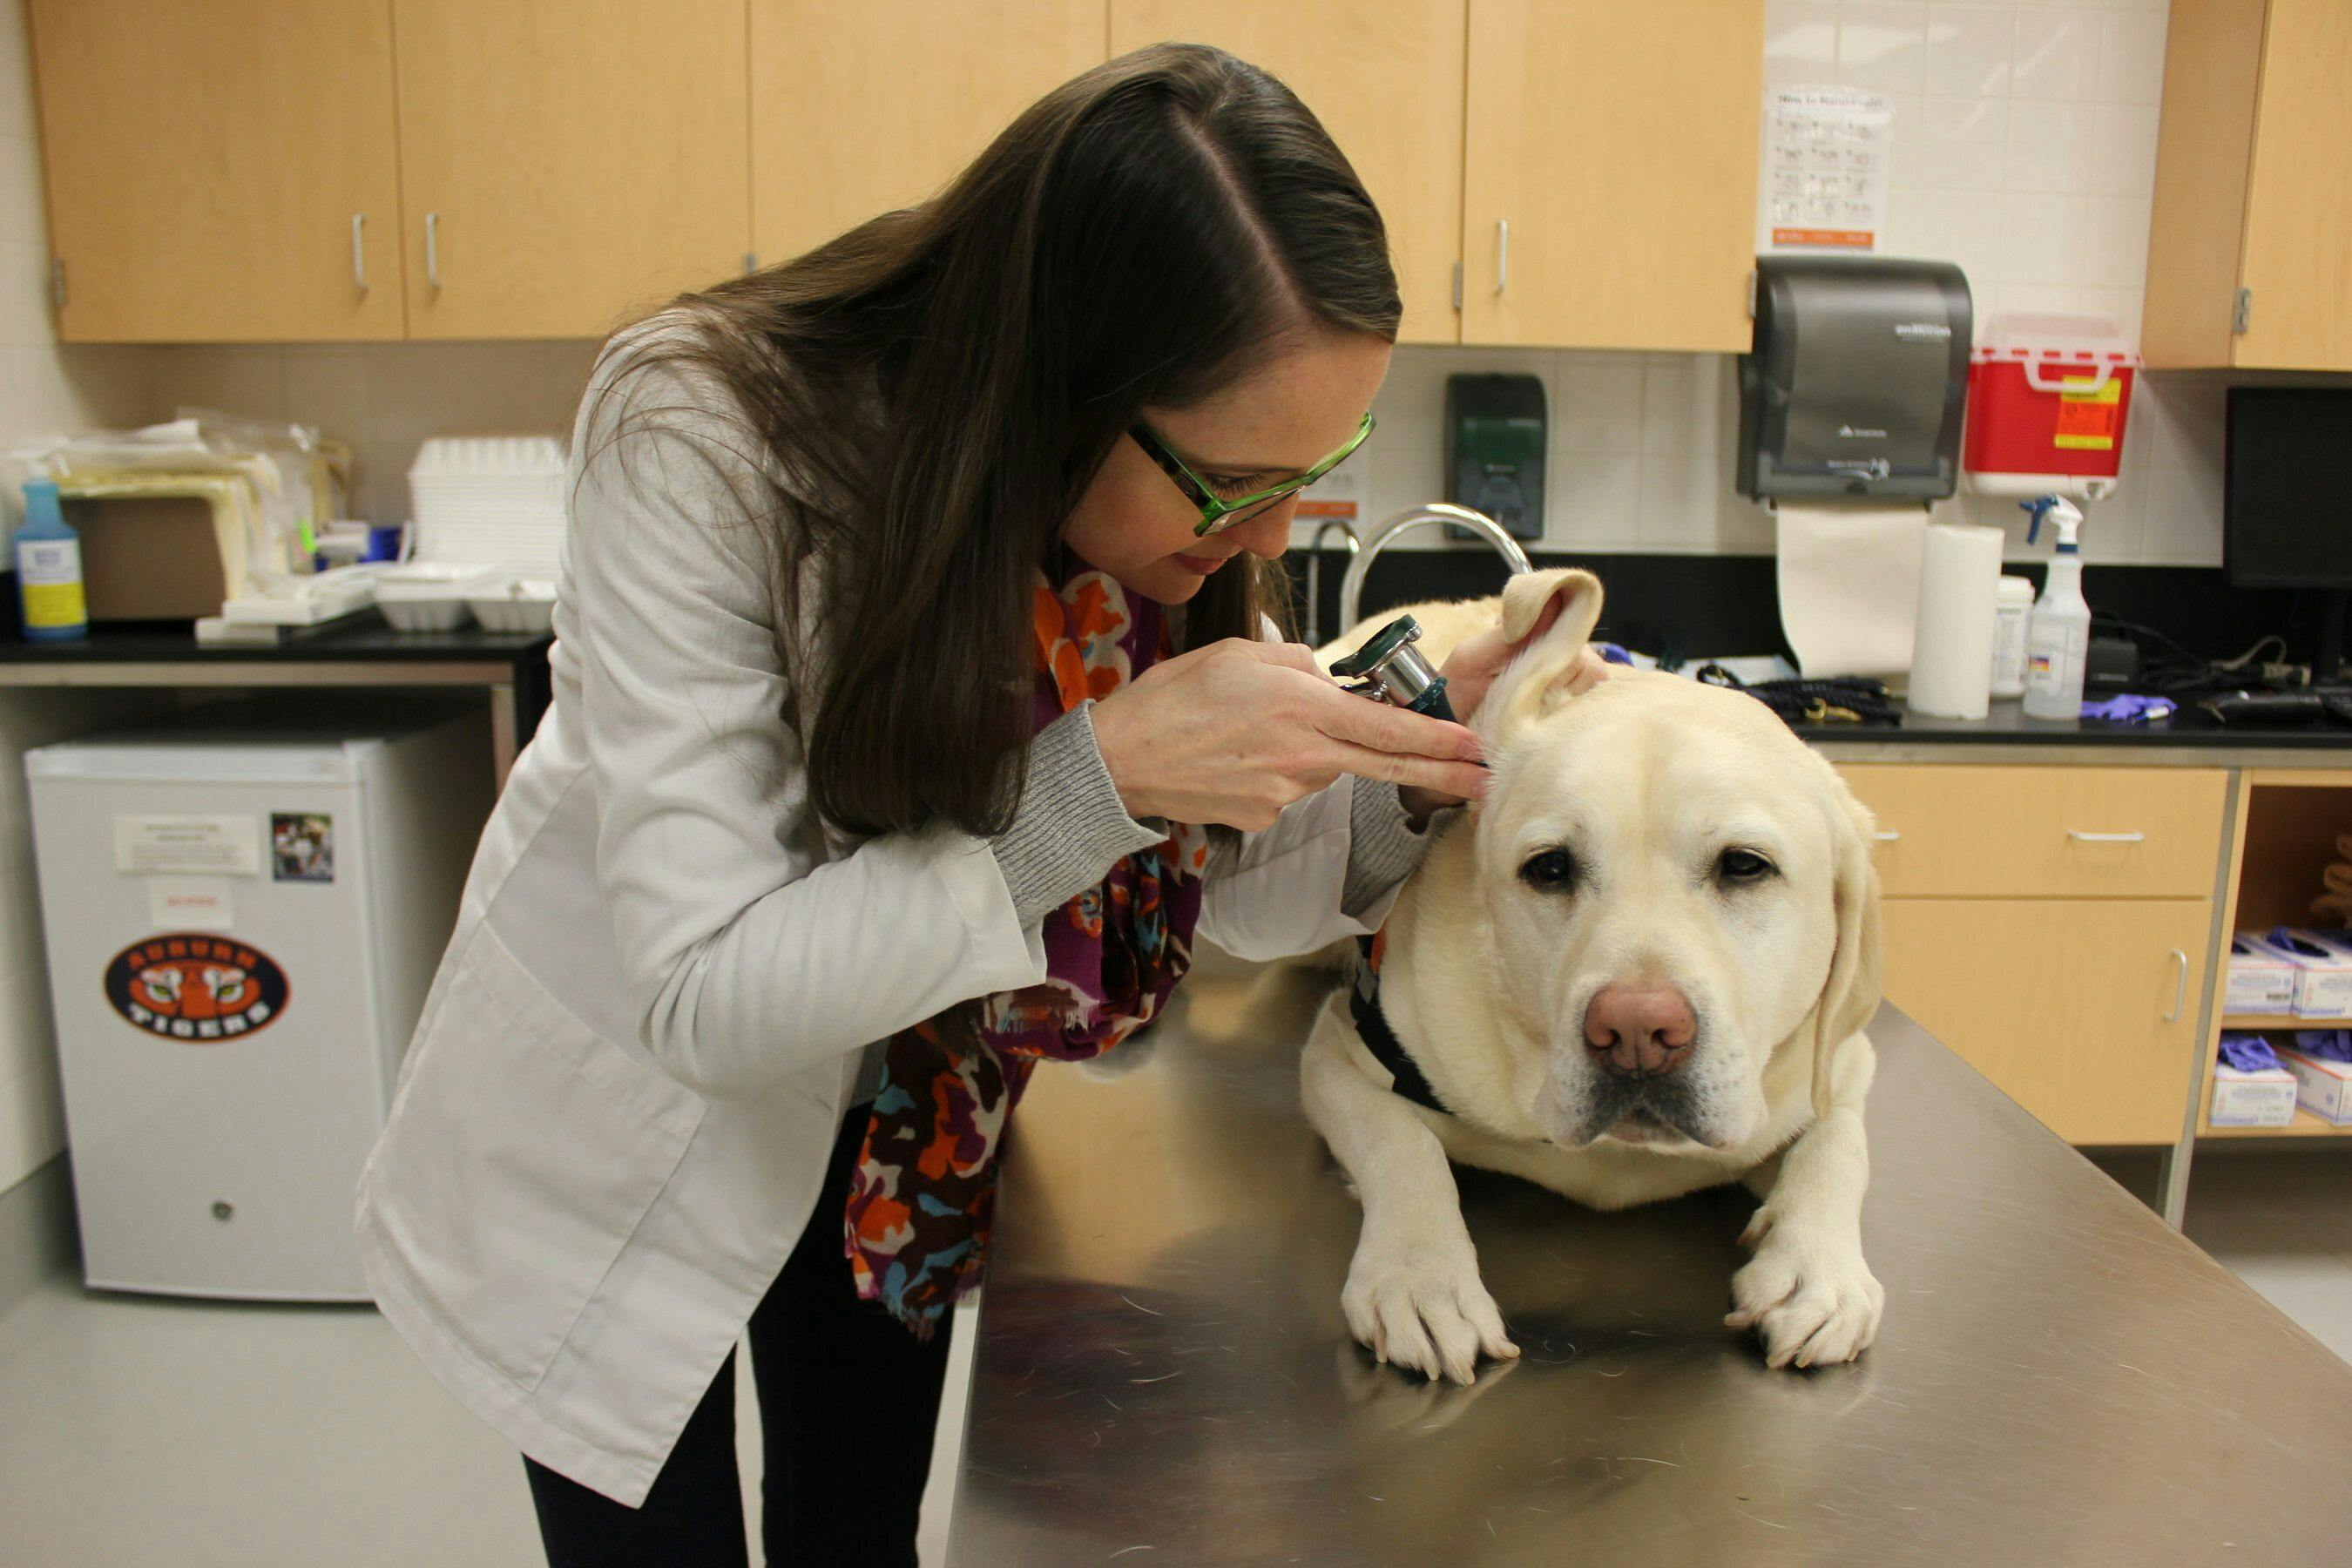 New resources for veterinary professionals improves access to care